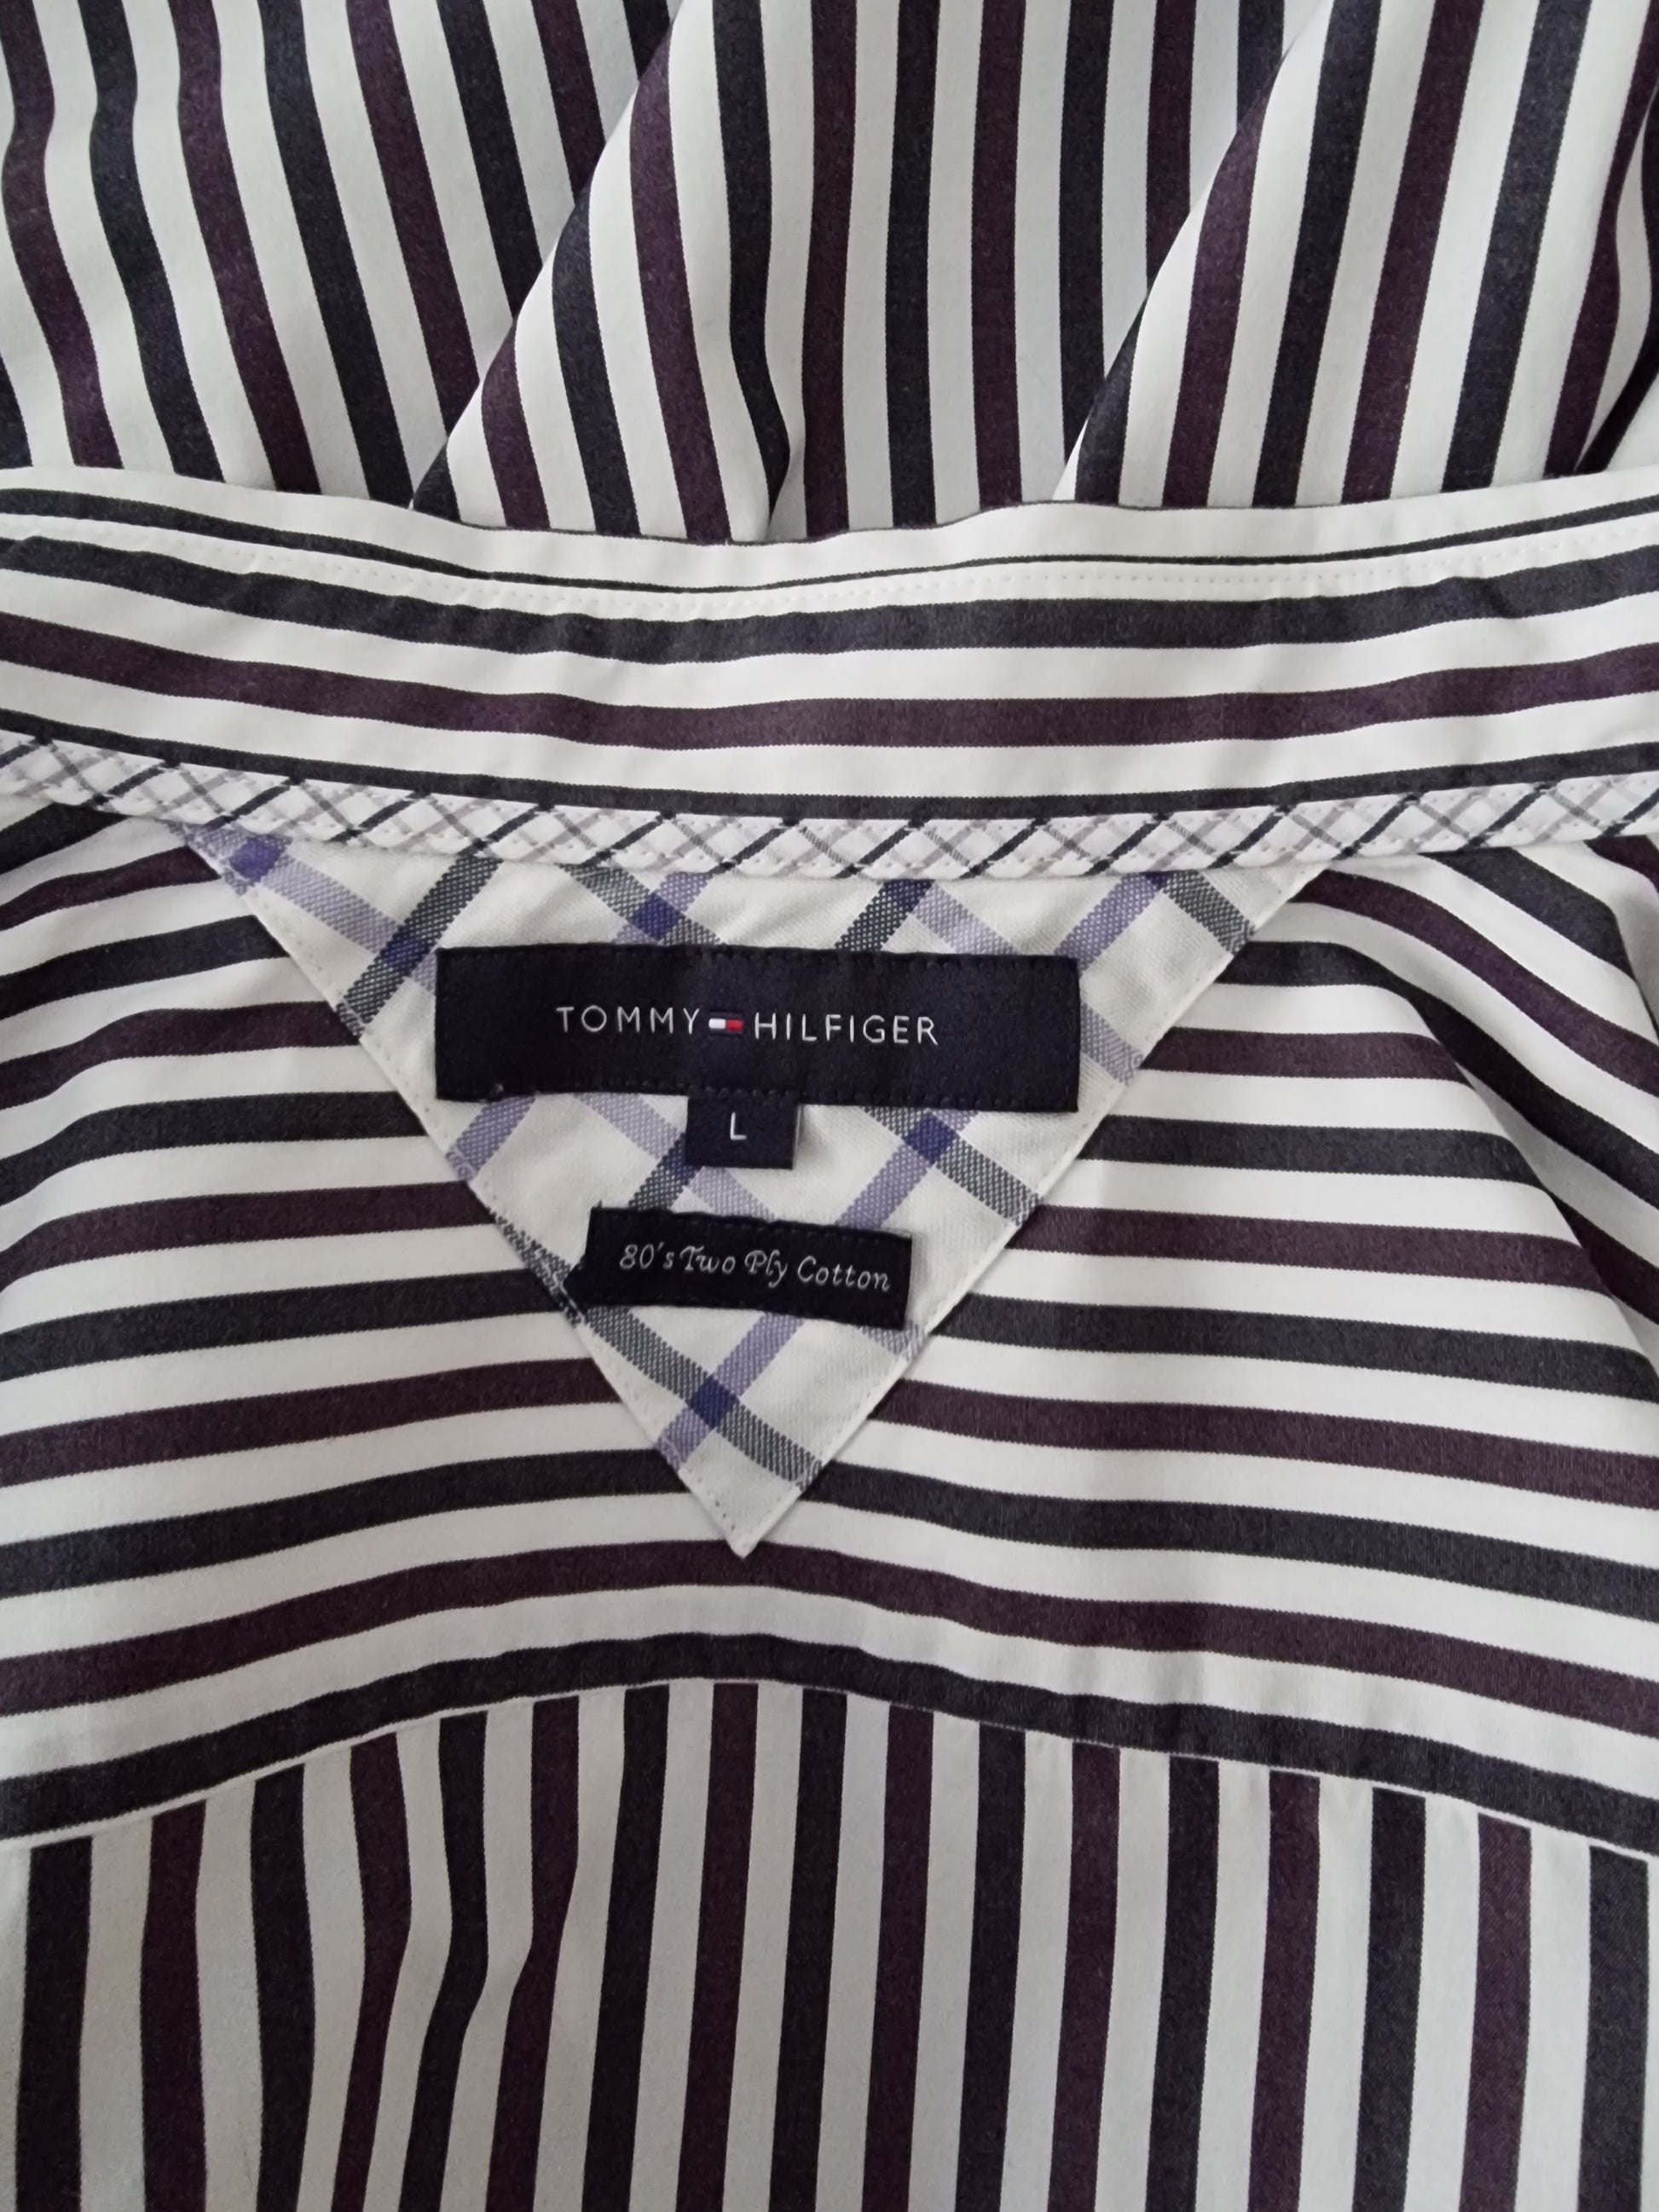 Tommy Hilfiger Mens Navy, Purple and White Stripe Long Sleeve Shirt UK L Timeless Fashions